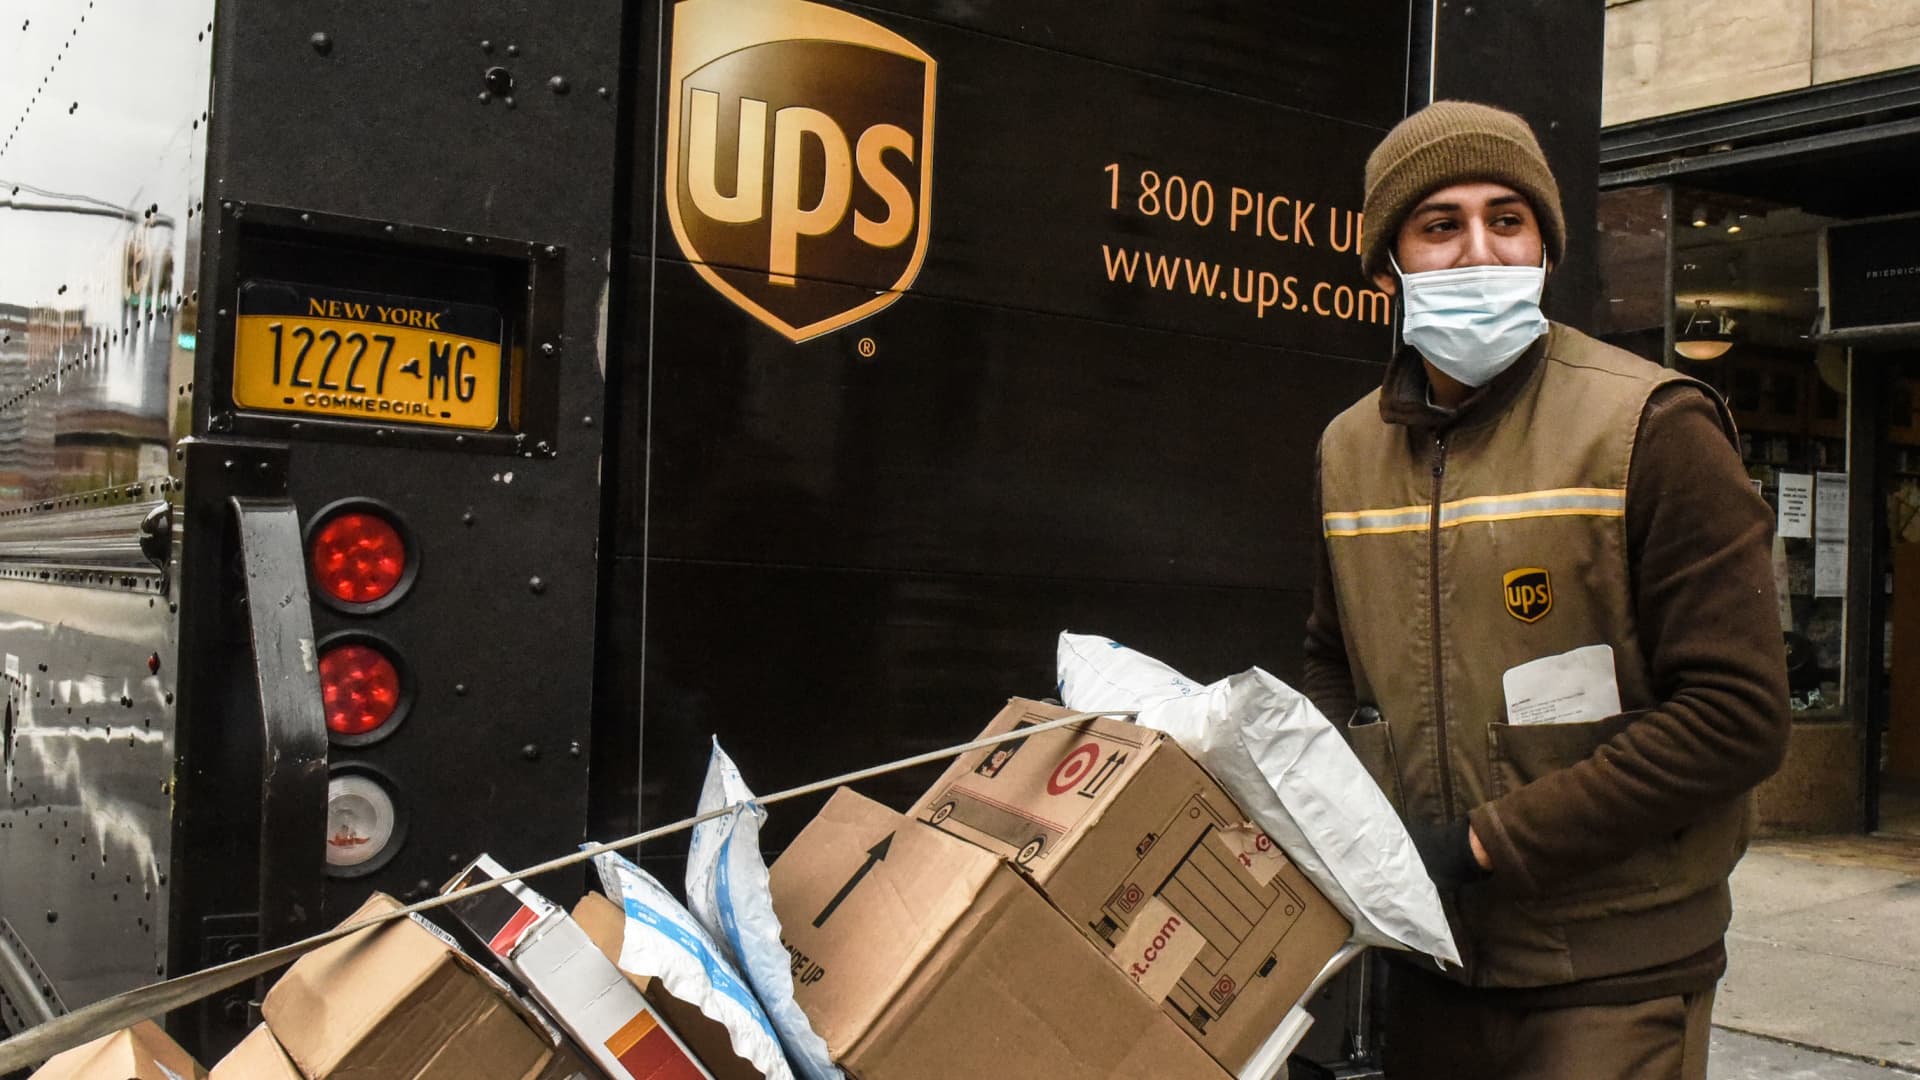 Shares of UPS fall after company says higher rates in Q2 offset lower-than-expected volumes